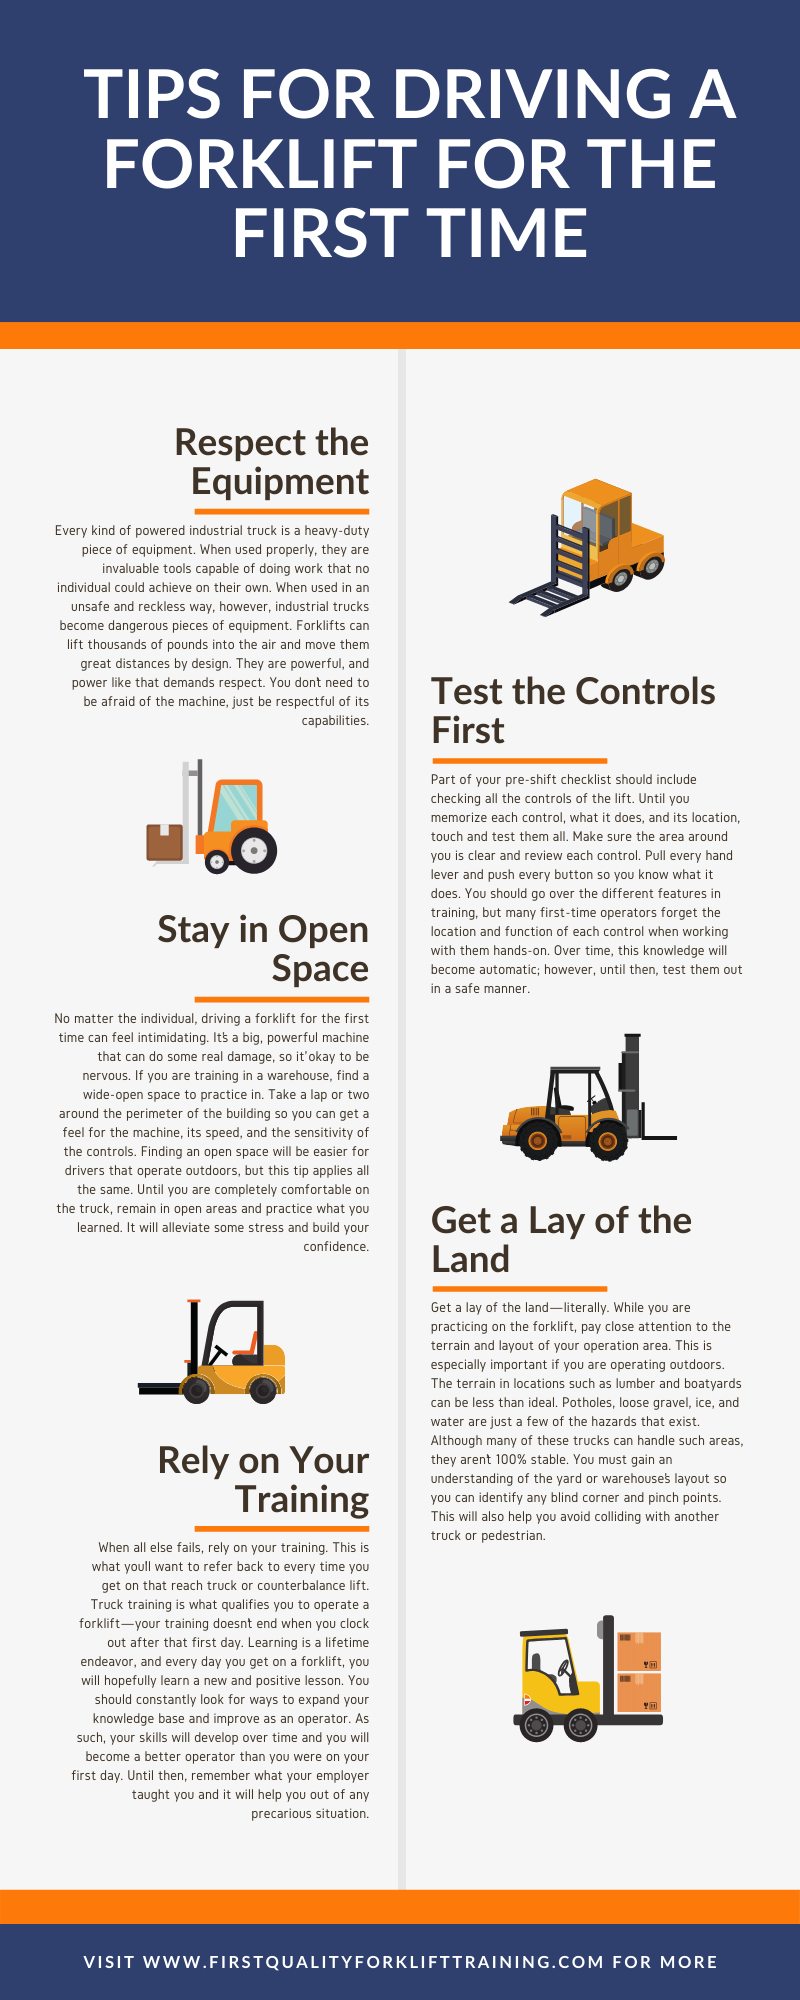 Driving a Forklift Tips